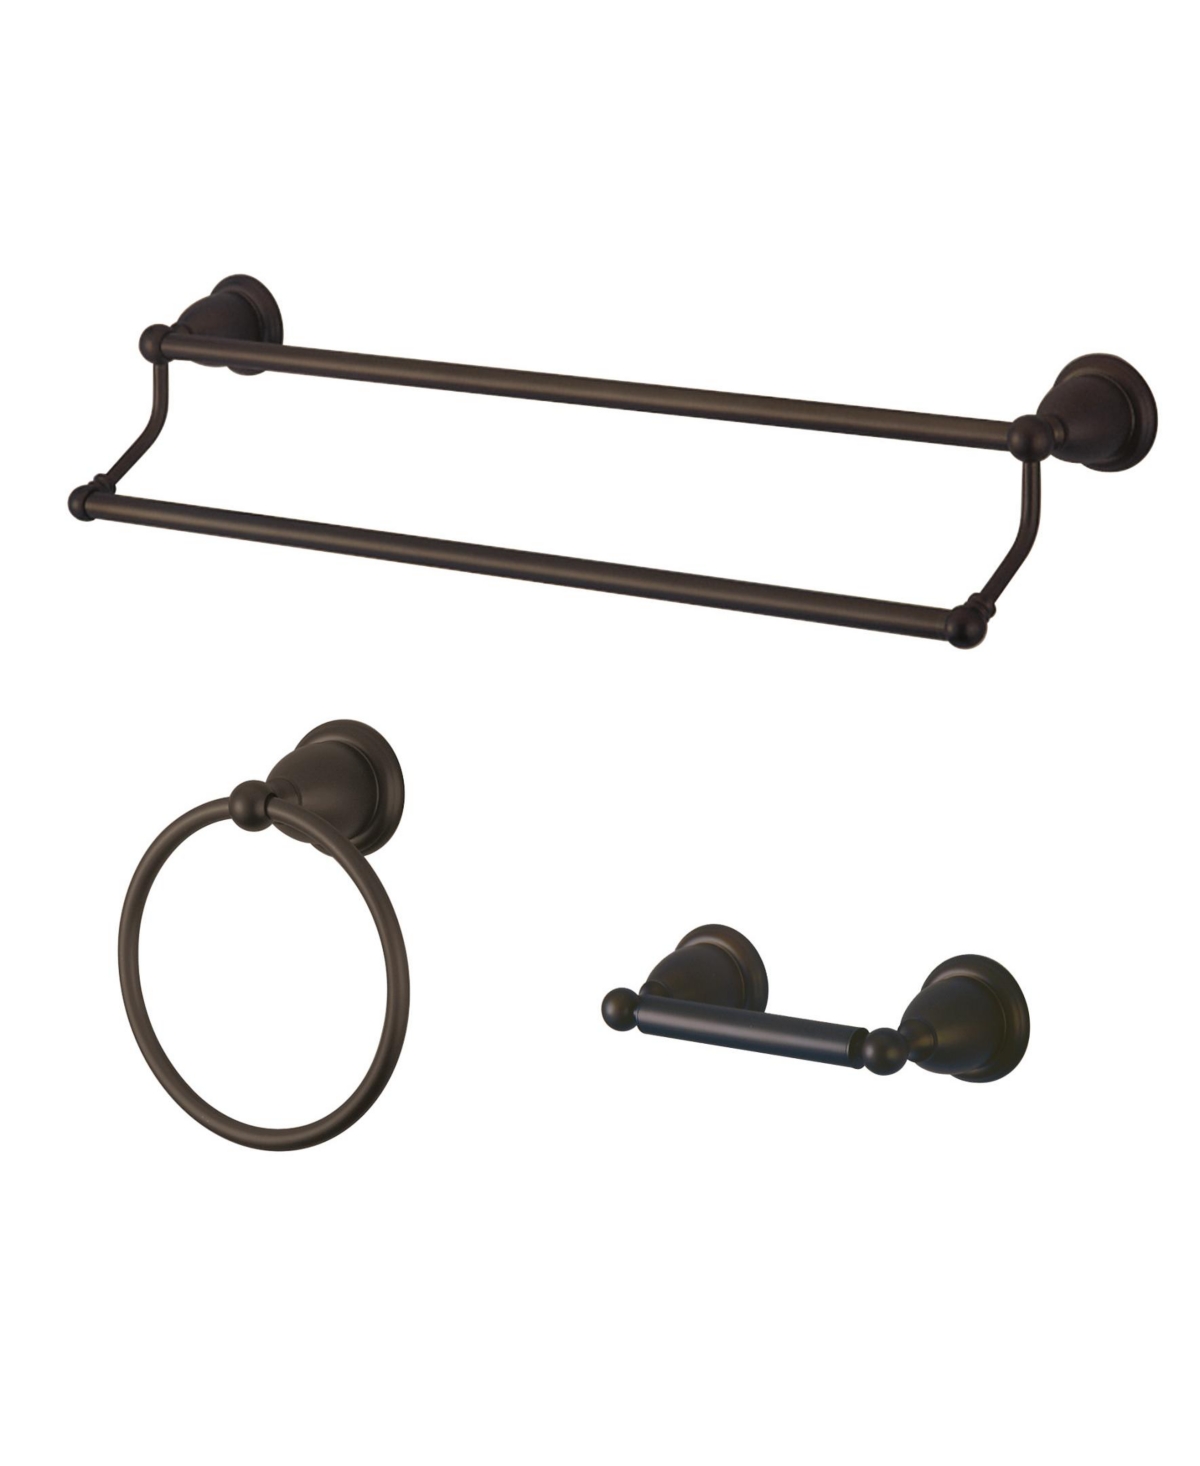 Kingston Brass Heritage 3-Pc. Dual Towel Bar Accessory Set in Oil Rubbed Bronze Bedding